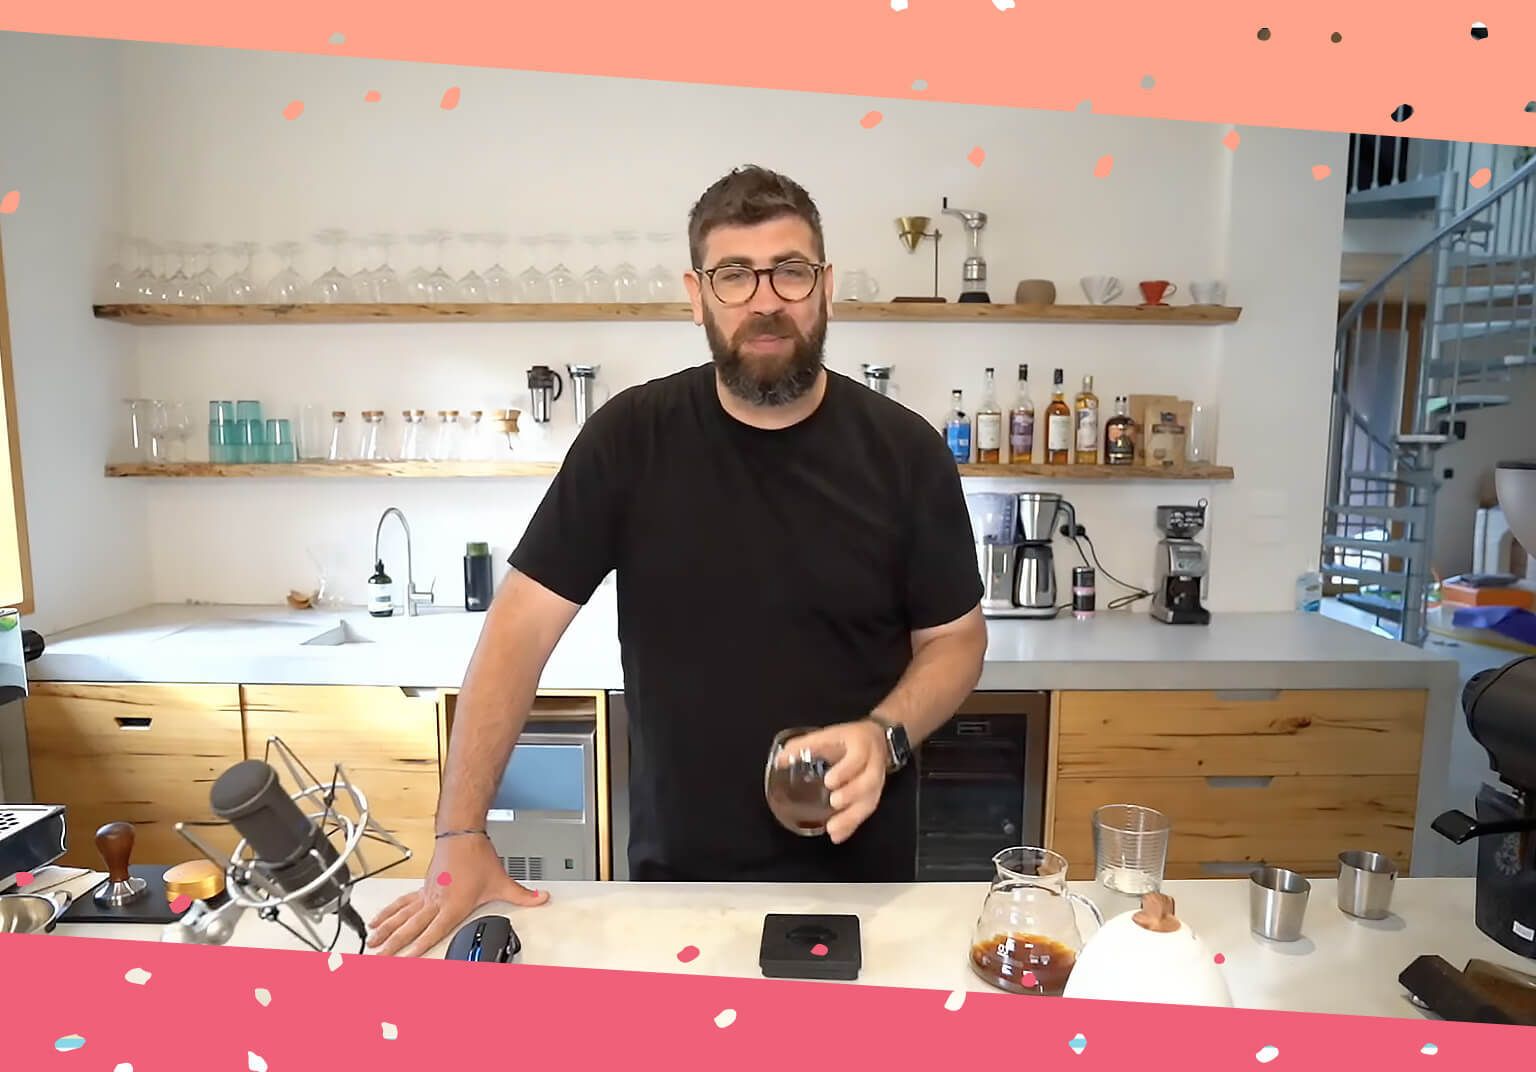 Joel standing in his kitchen holding a cup of coffee, surrounded by coffee-making tools